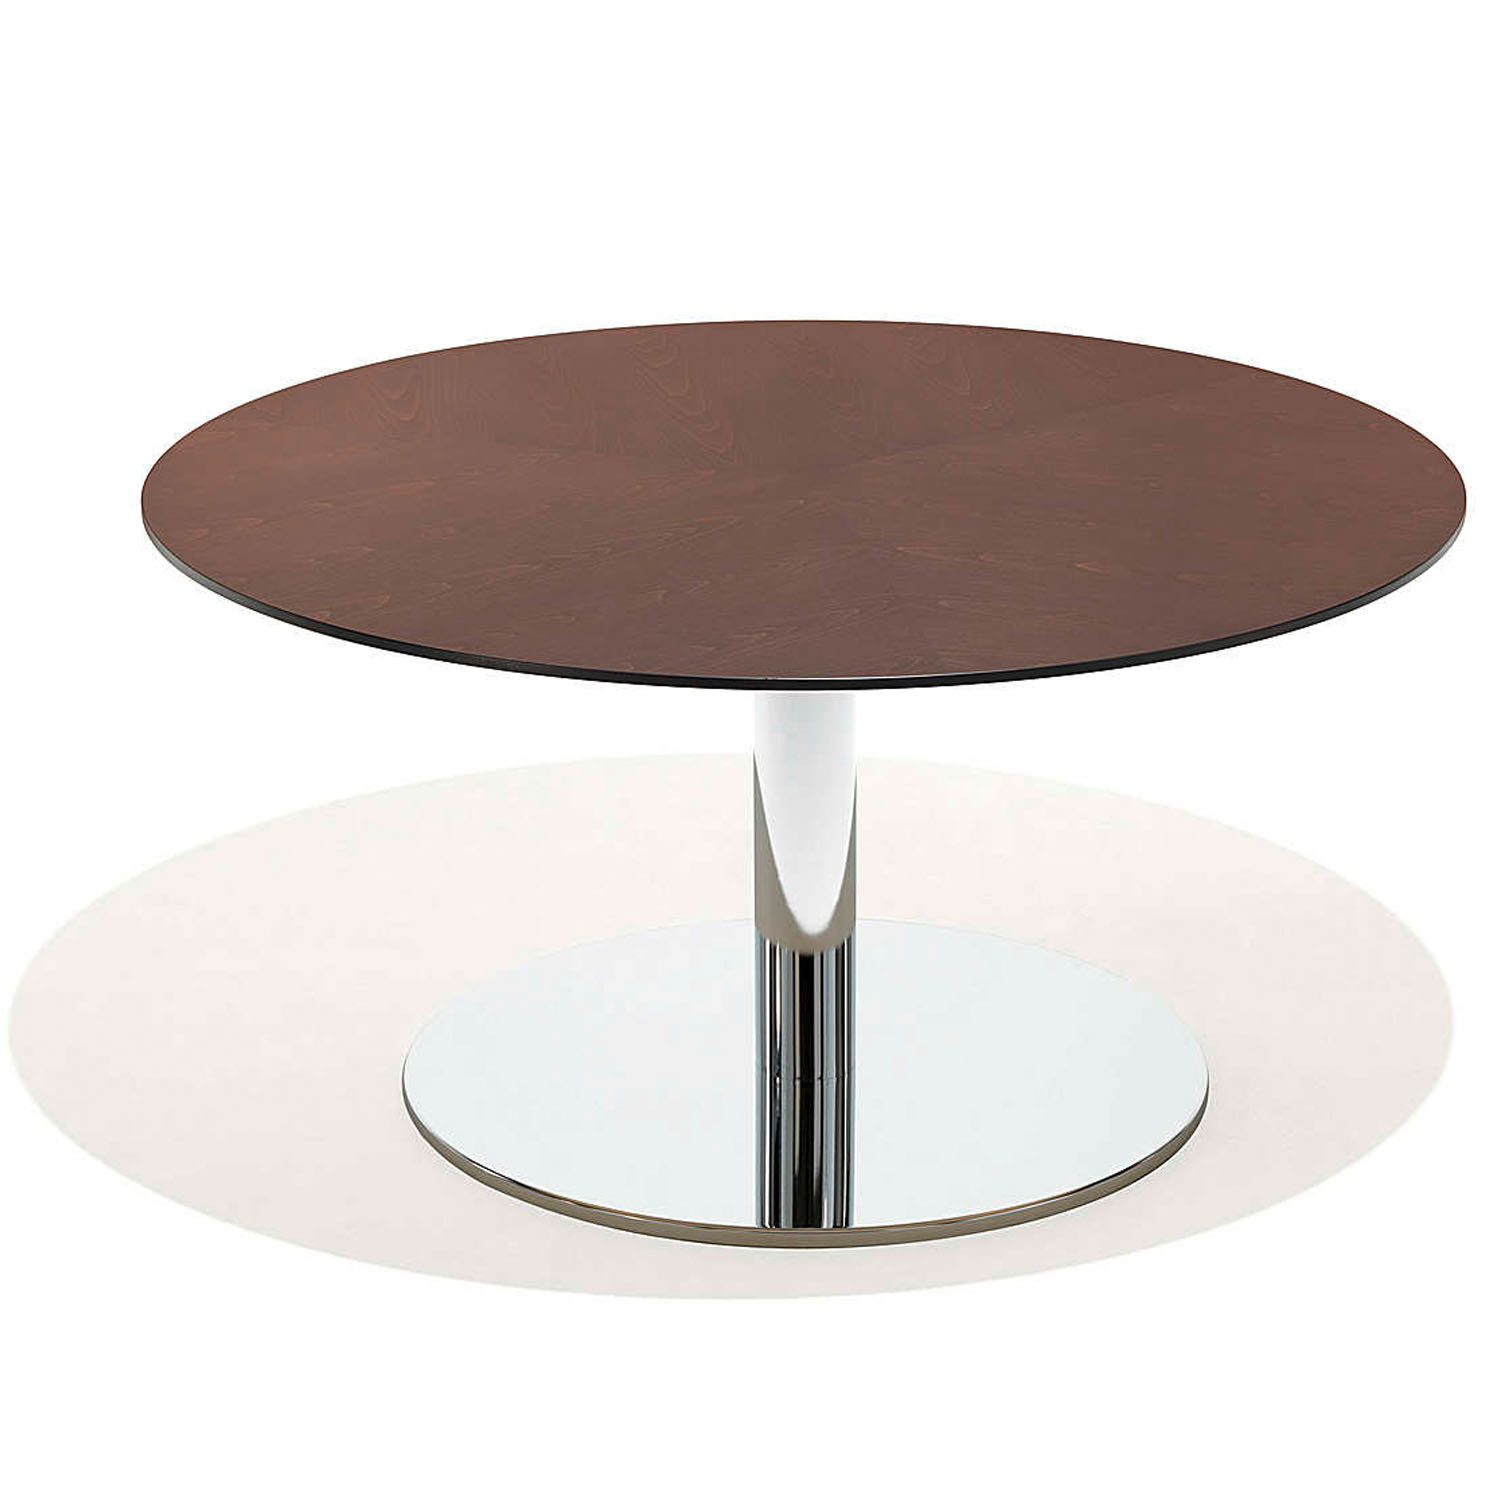 8800 Cafe Height Table with round plate base